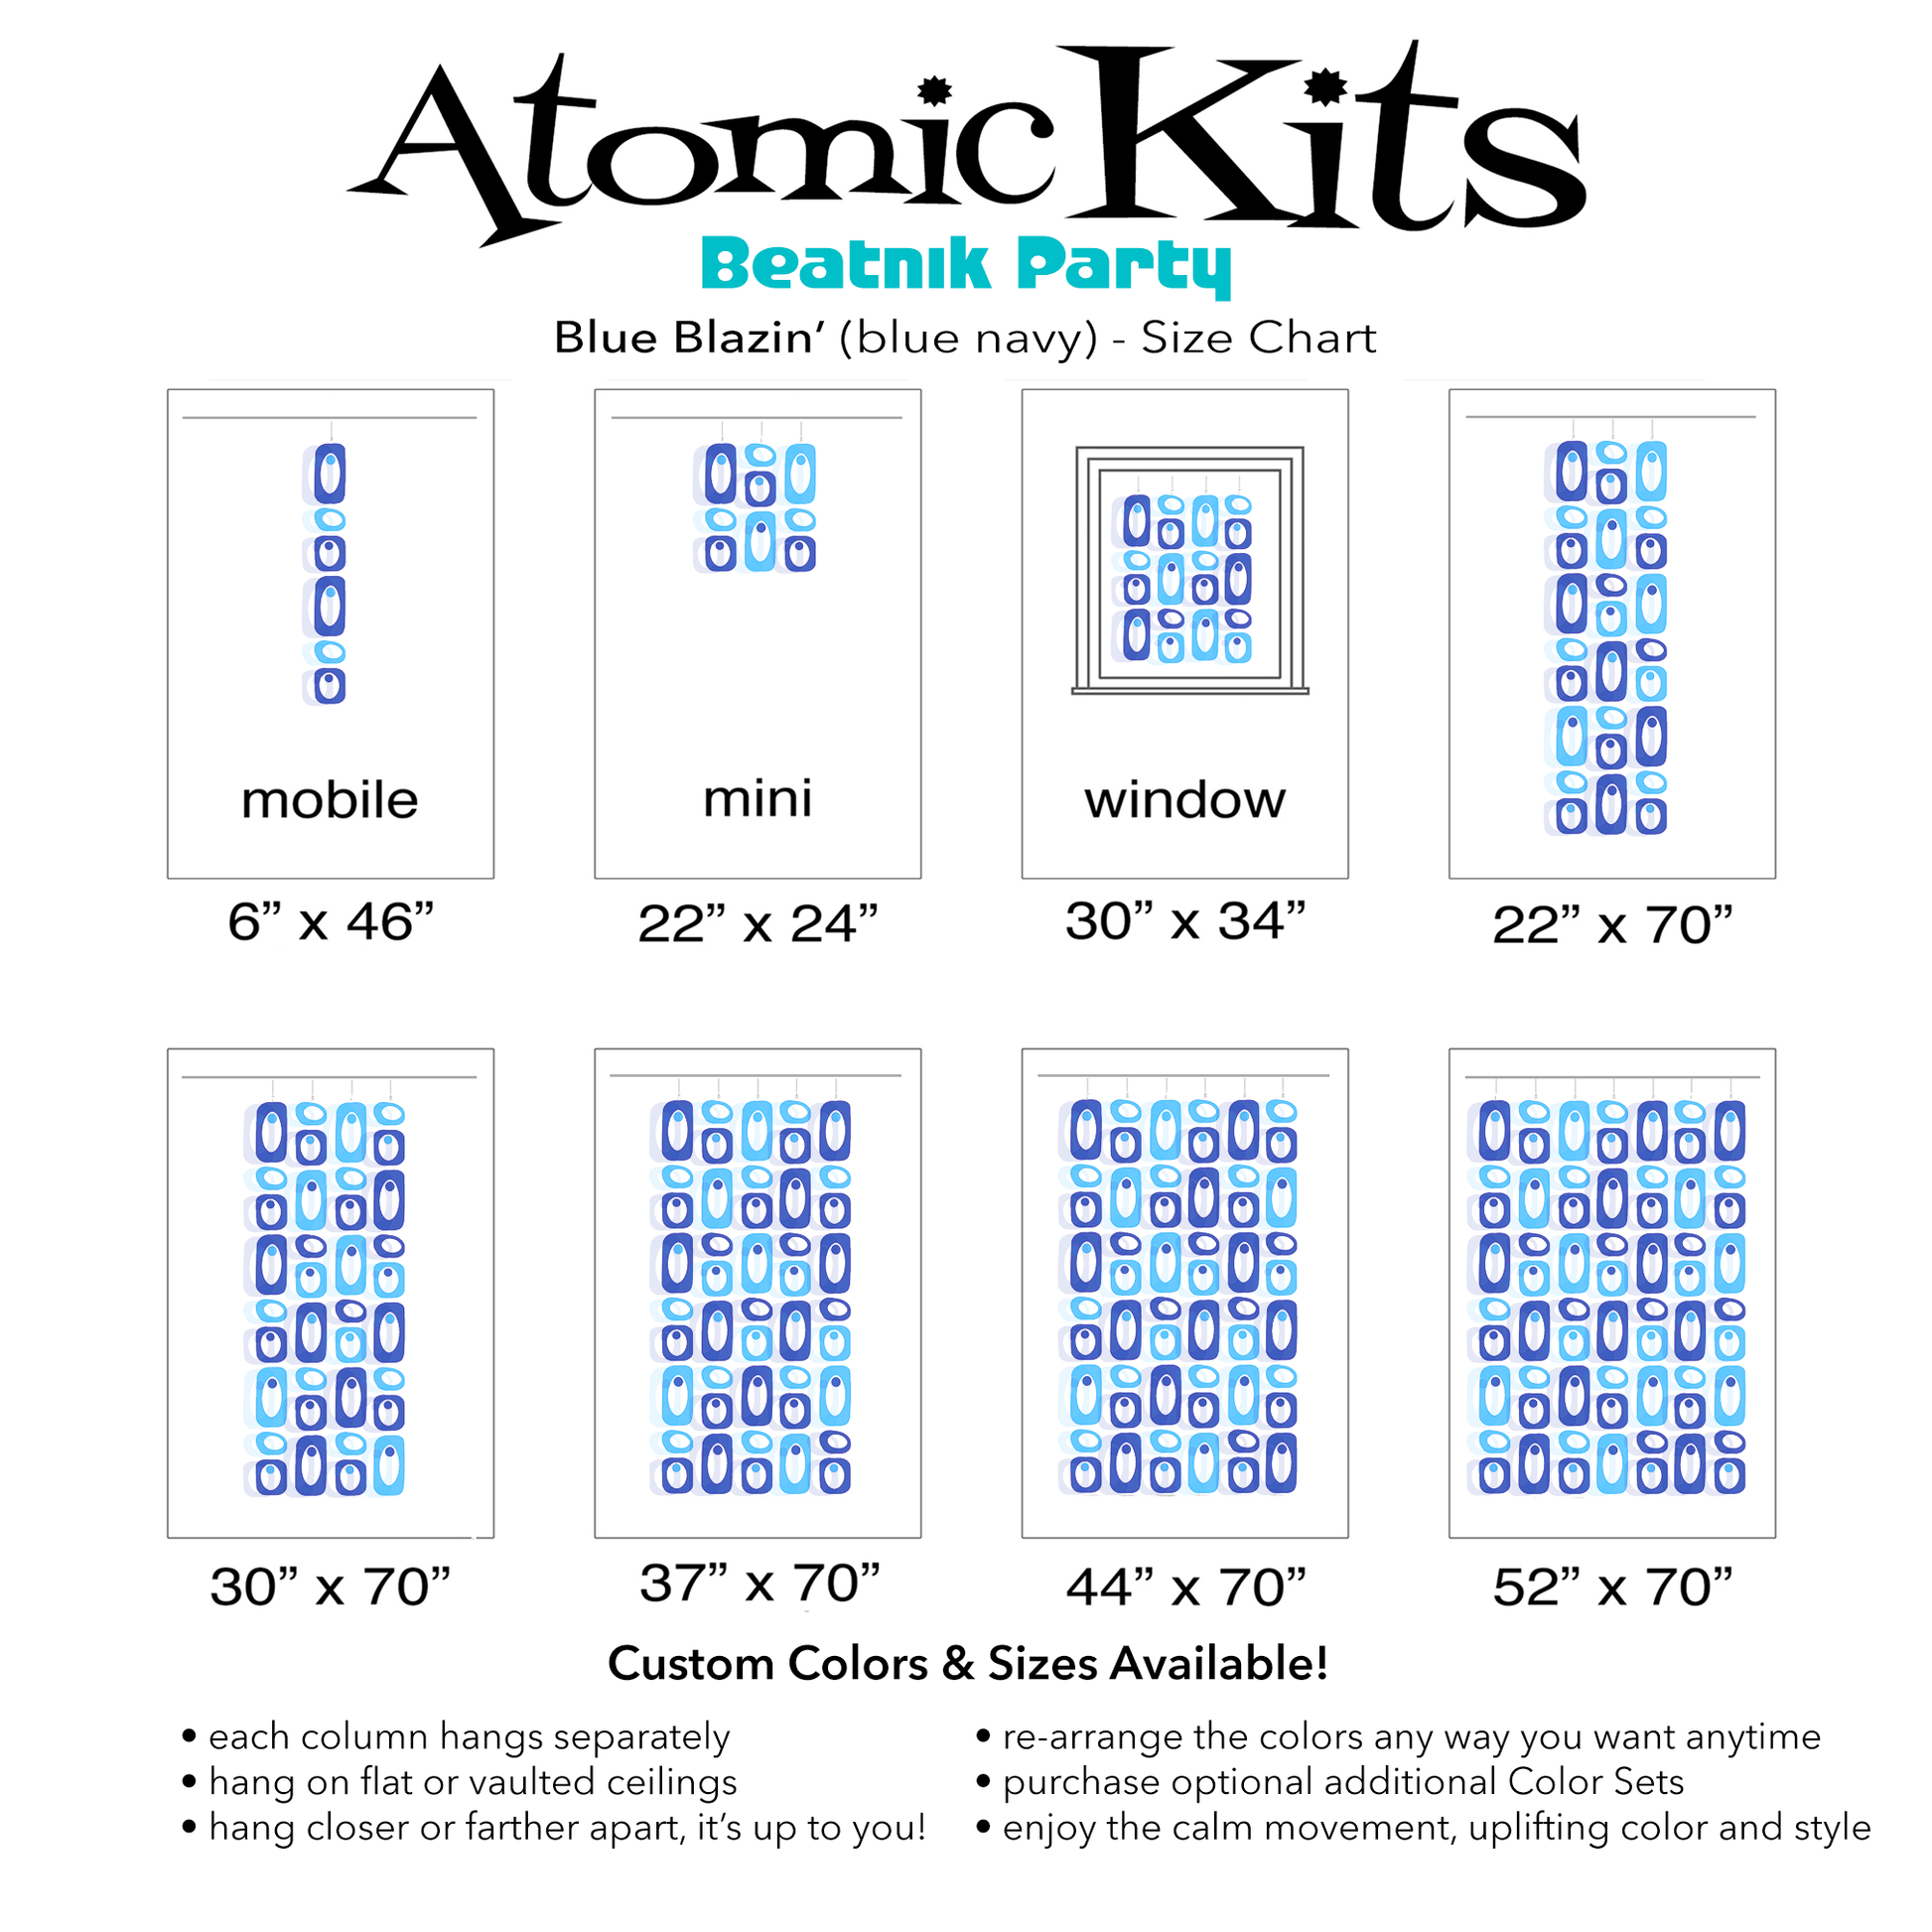 Color Chart for beautiful blue and navy DIY Atomic Kits - Mid Century Modern retro hanging art mobiles, curtains, room dividers, screens by AtomicMobiles.com